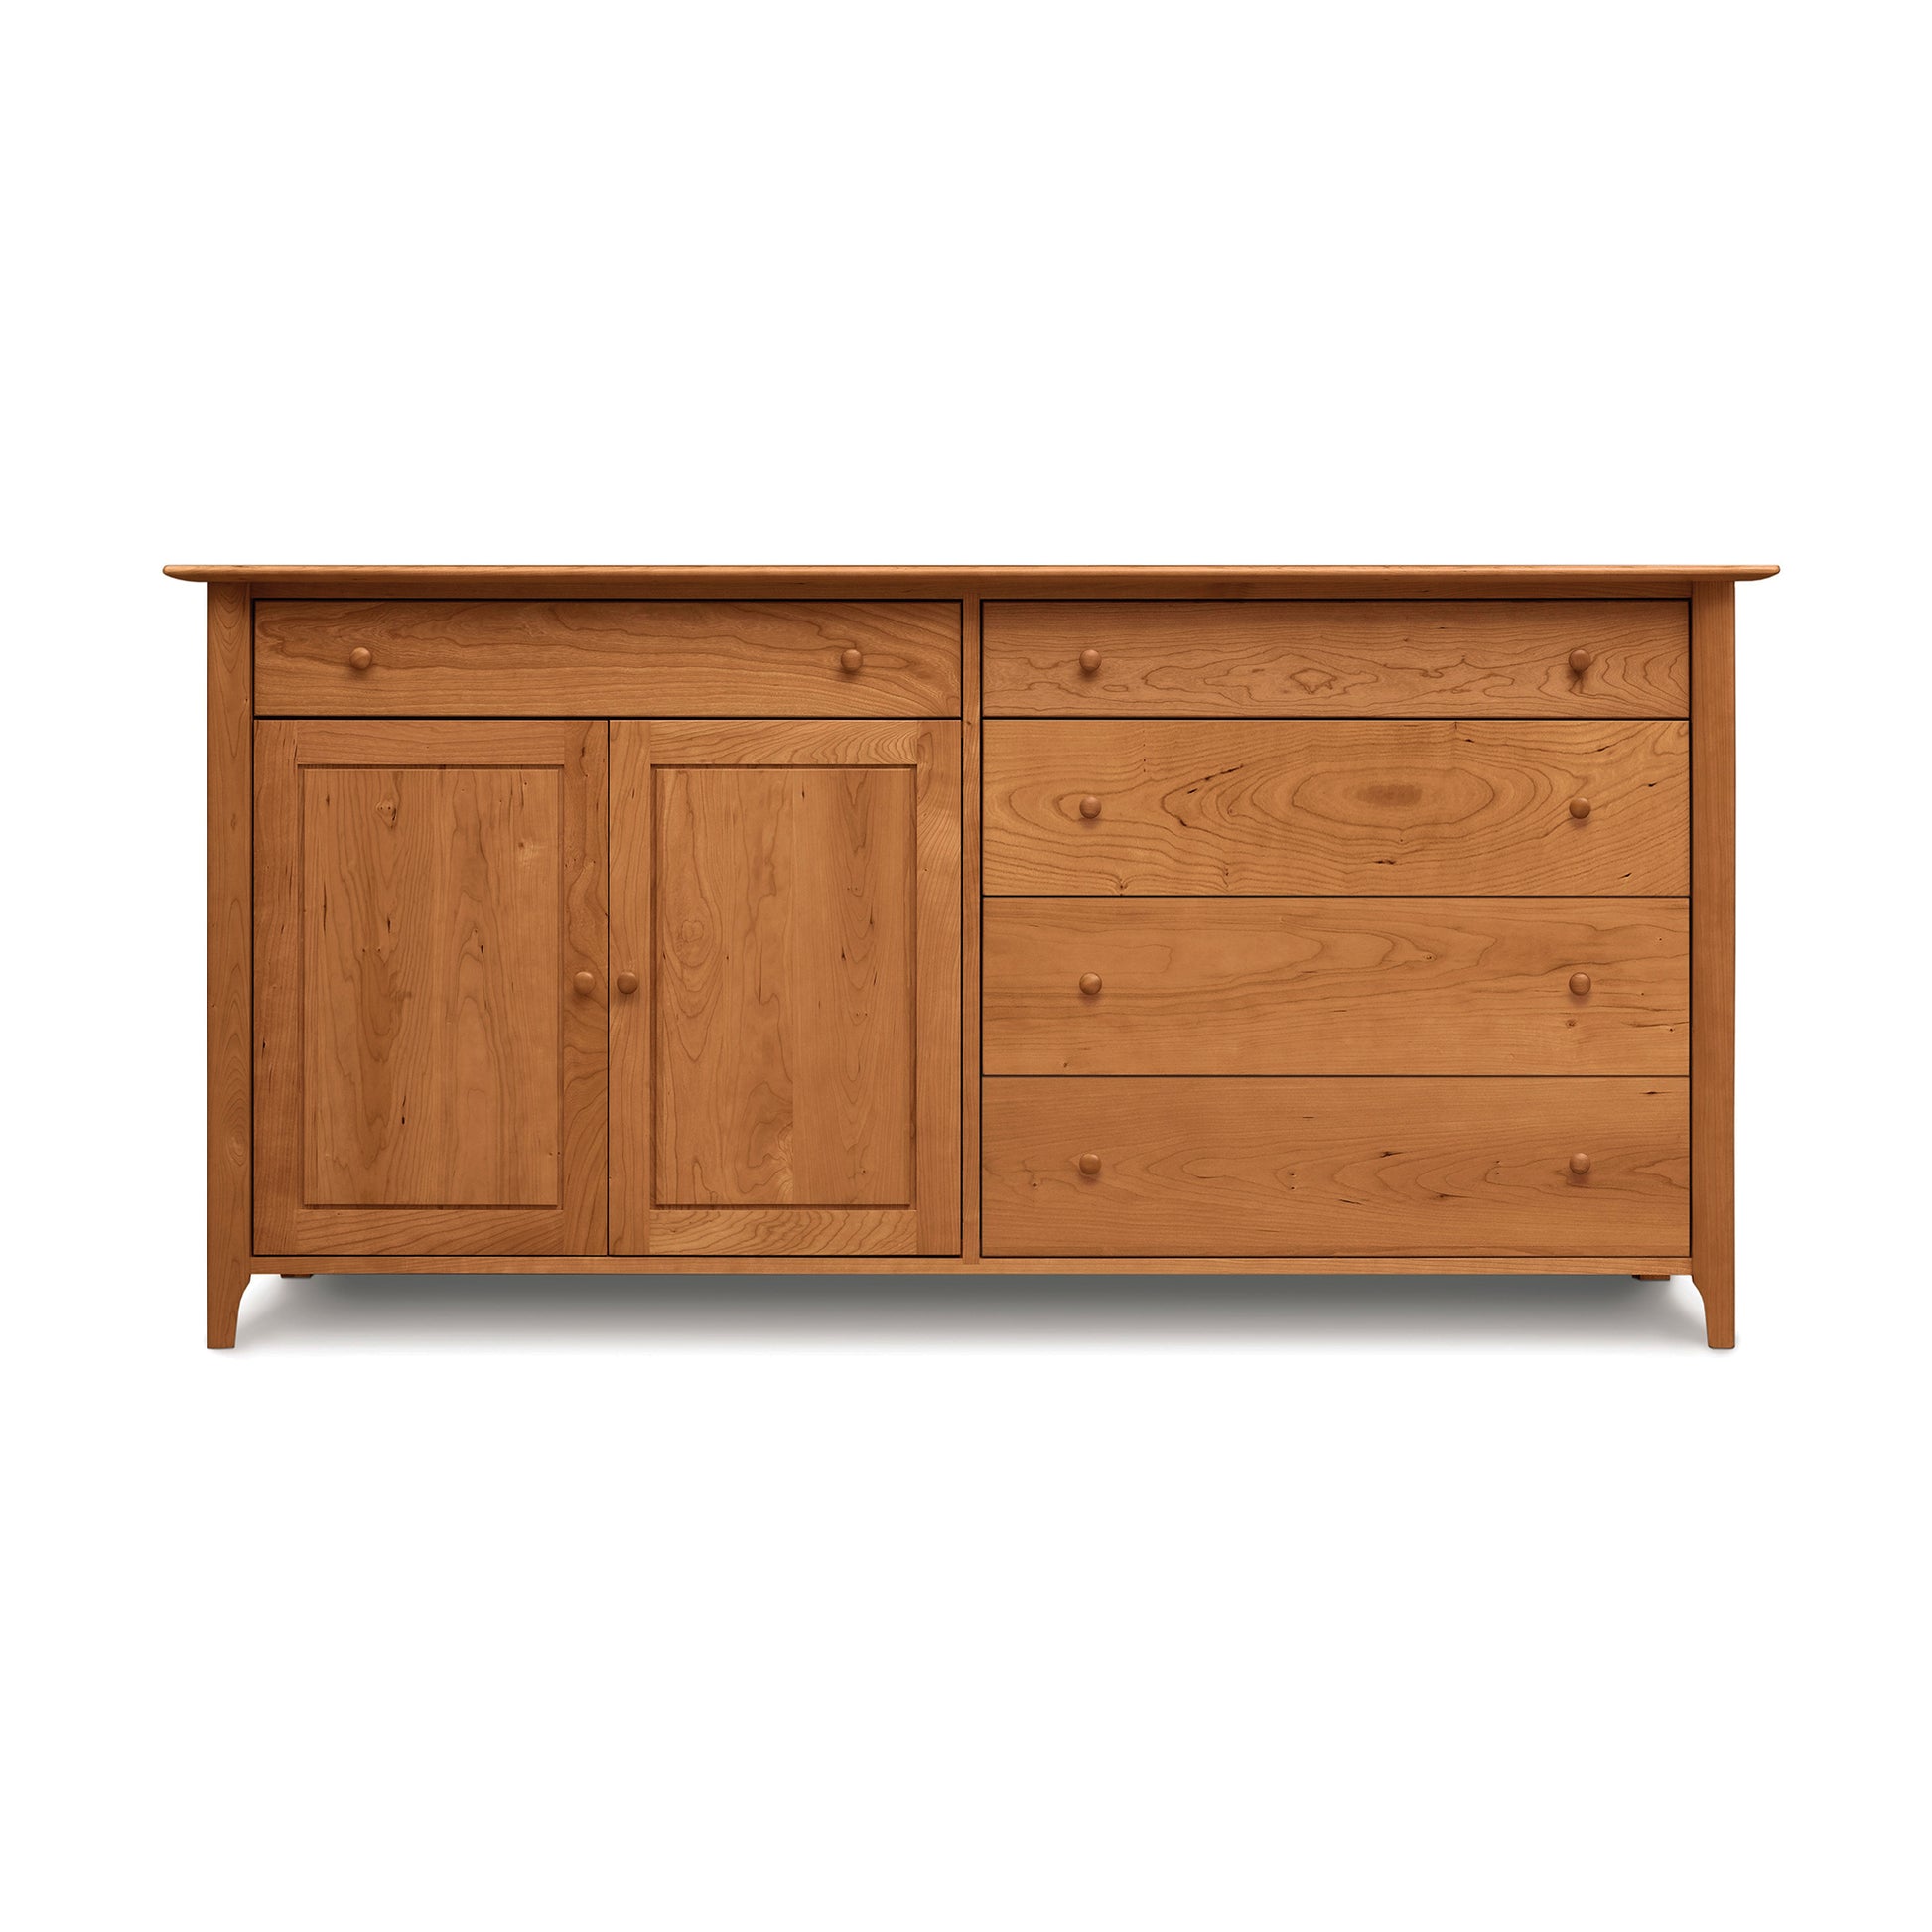 Luxury Sarah 2 Door, 5 Drawer Buffet wooden sideboard by Copeland Furniture, isolated on a white background.